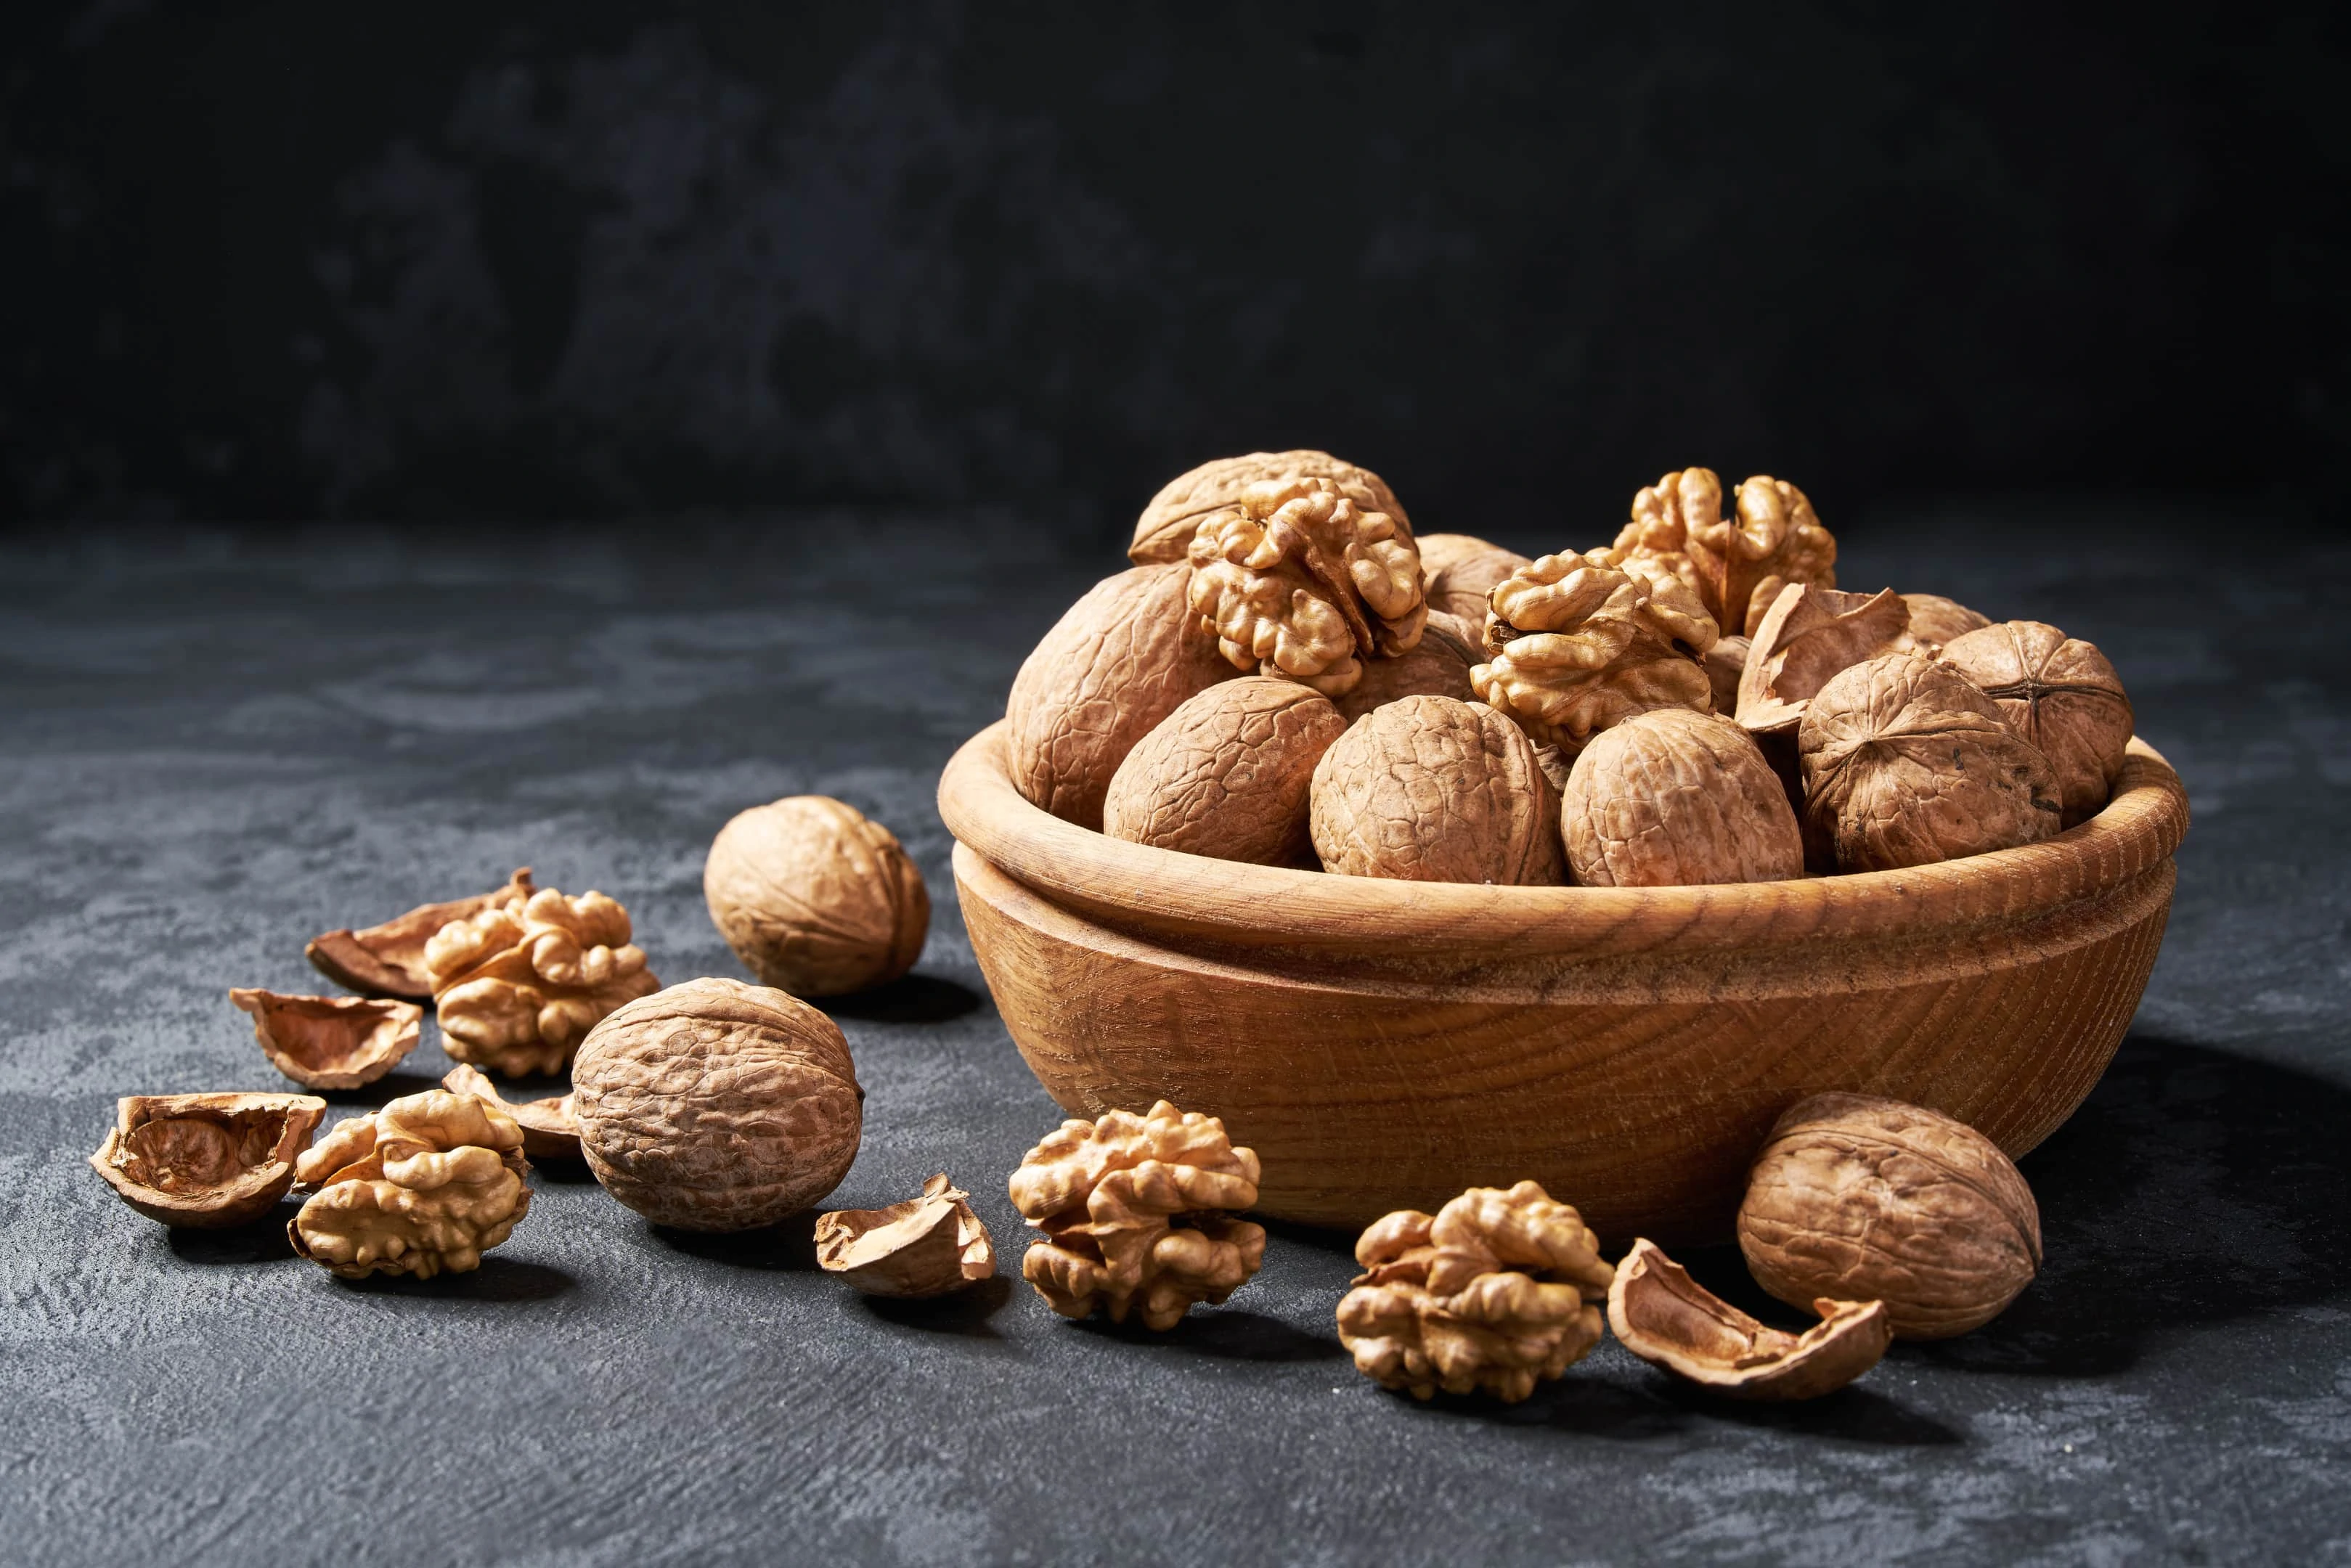 Raw walnuts in wooden bowl on dark table